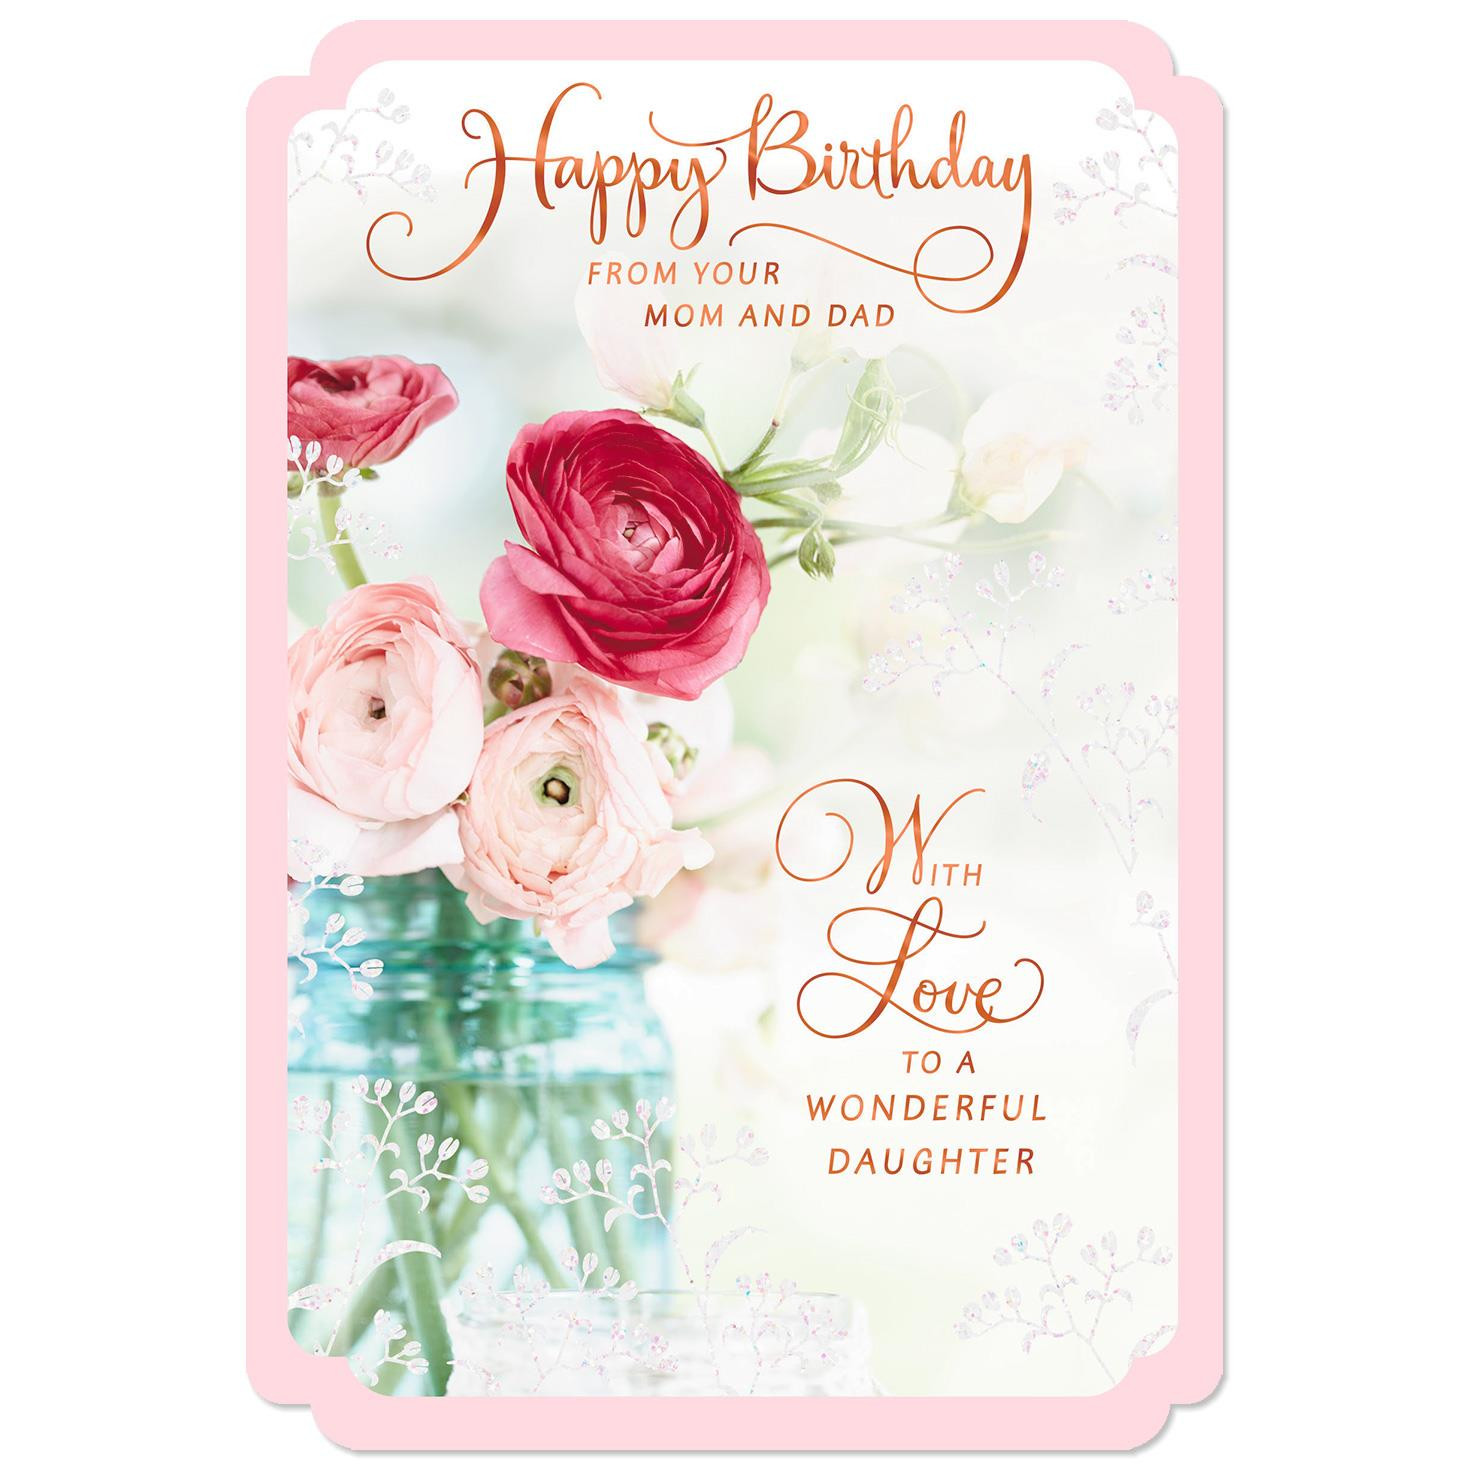 Free Birthday Cards For Daughter
 Wishes for a Wonderful Daughter Birthday Card from Mom and